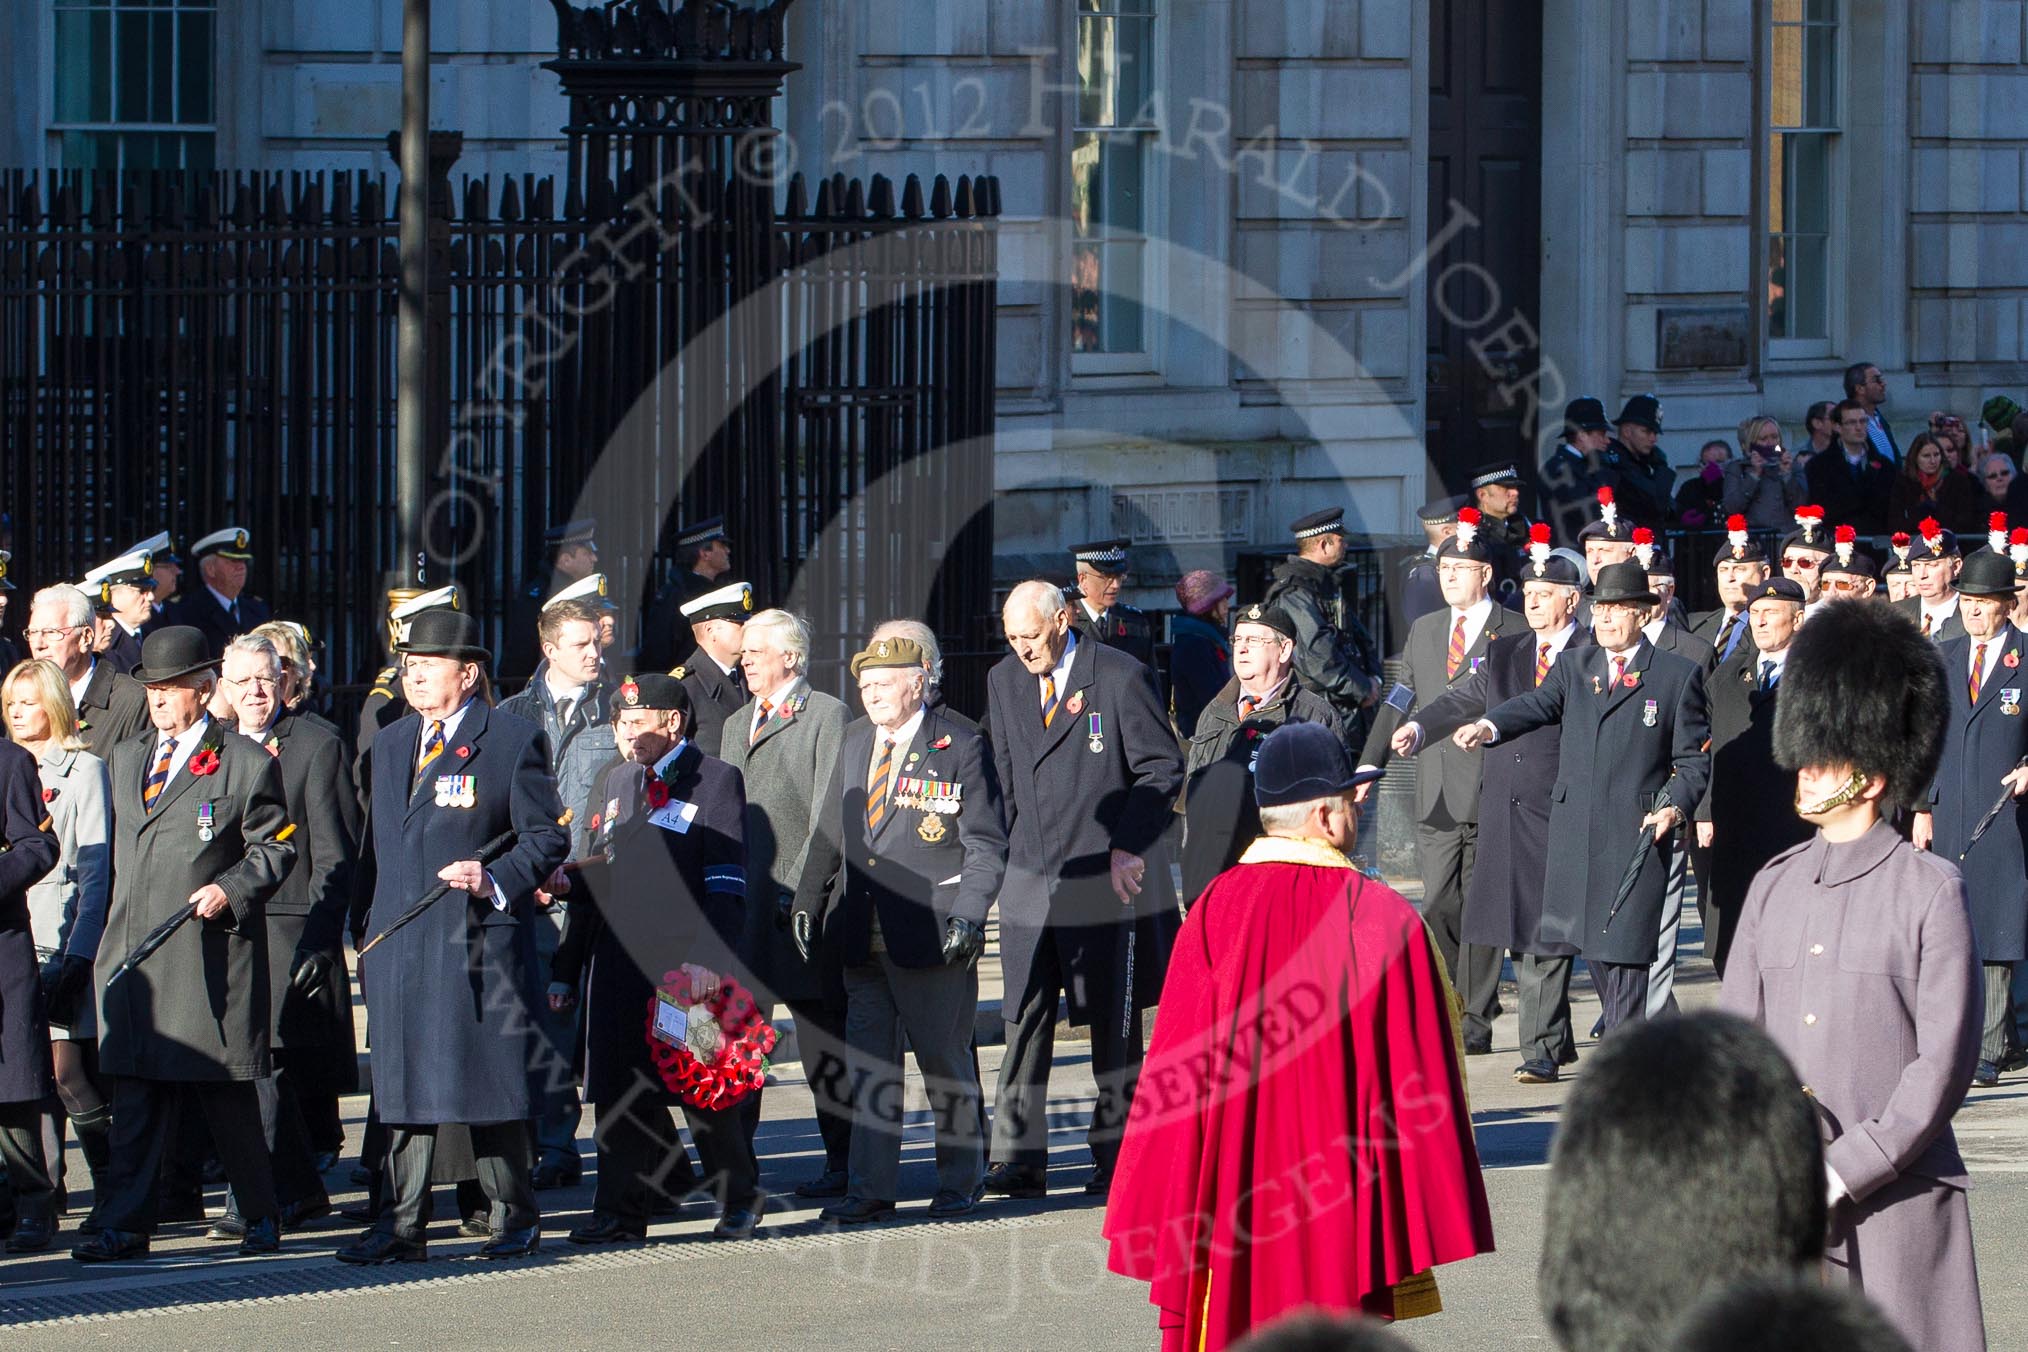 Remembrance Sunday 2012 Cenotaph March Past: Group A4 - Royal Sussex Regimental Association and A5 - Royal Hampshire Regiment Comrades Association..
Whitehall, Cenotaph,
London SW1,

United Kingdom,
on 11 November 2012 at 11:48, image #569